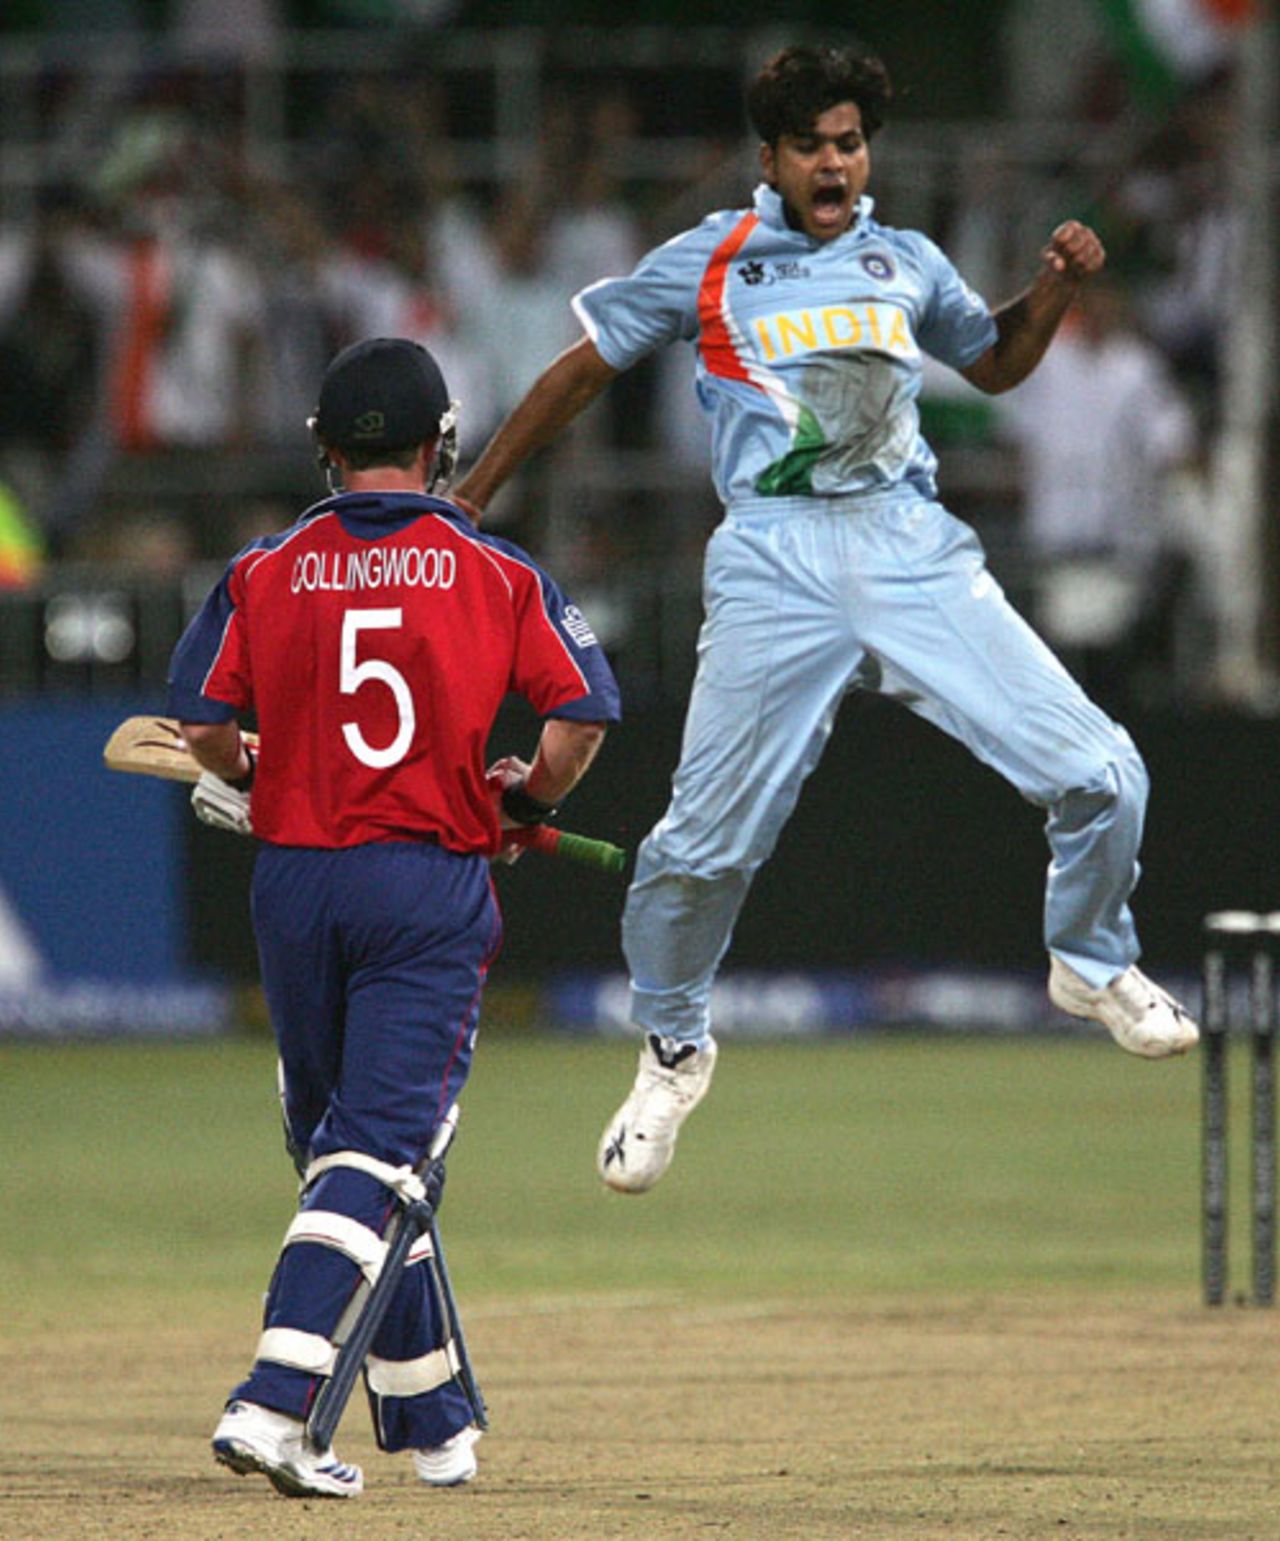 RP Singh whoops it up after bowling Paul Collingwood, England v India, Group E, ICC World Twenty20, Durban, September 19, 2007